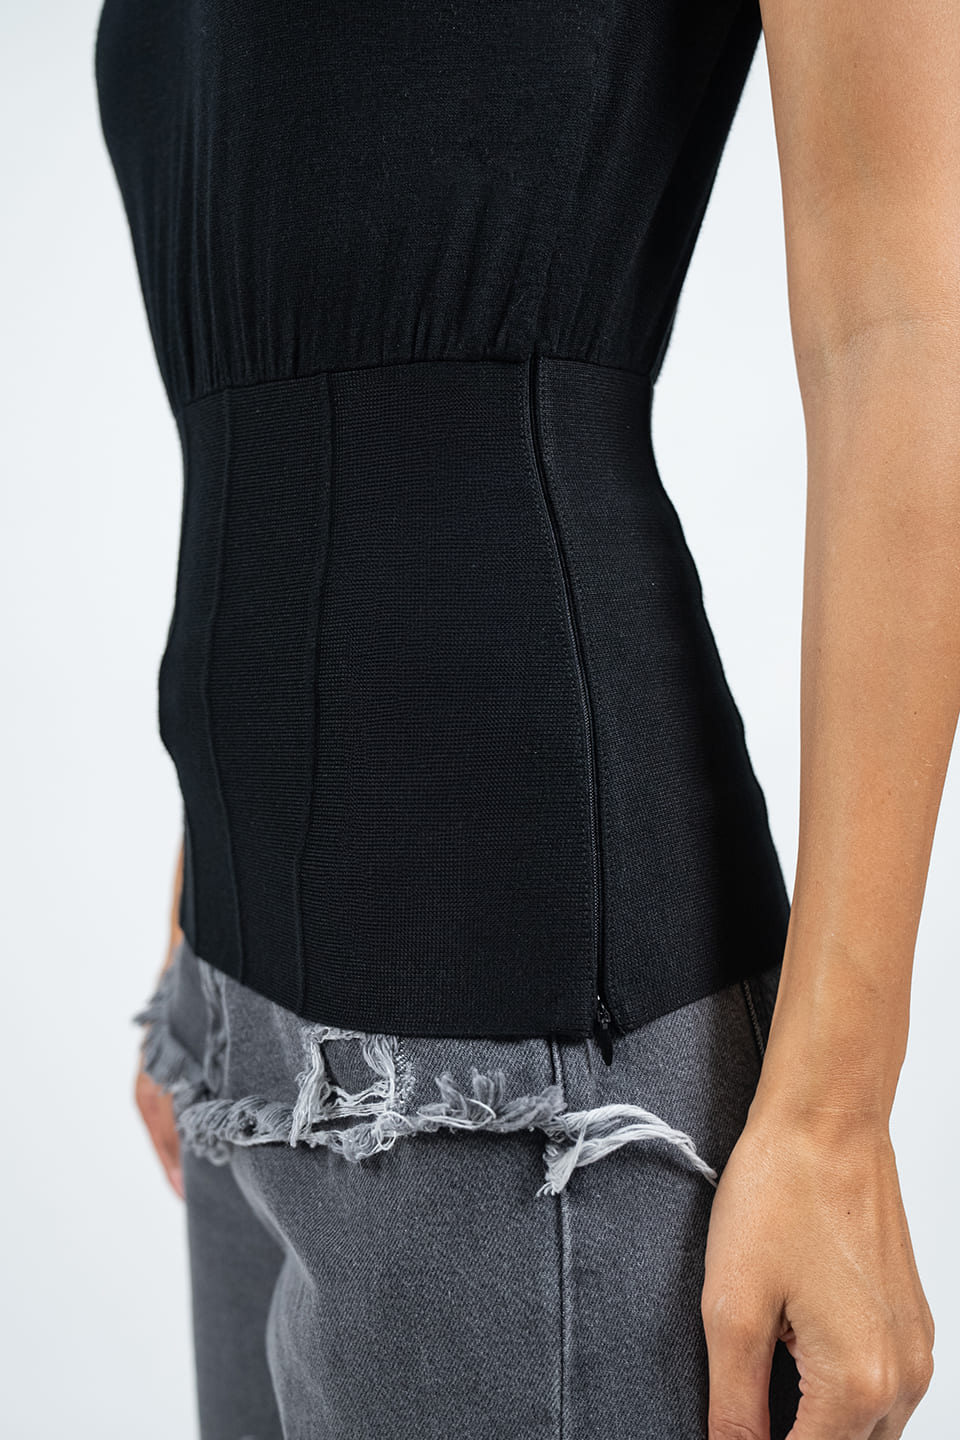 Thumbnail for Product gallery 4, Black Corset Knit Top